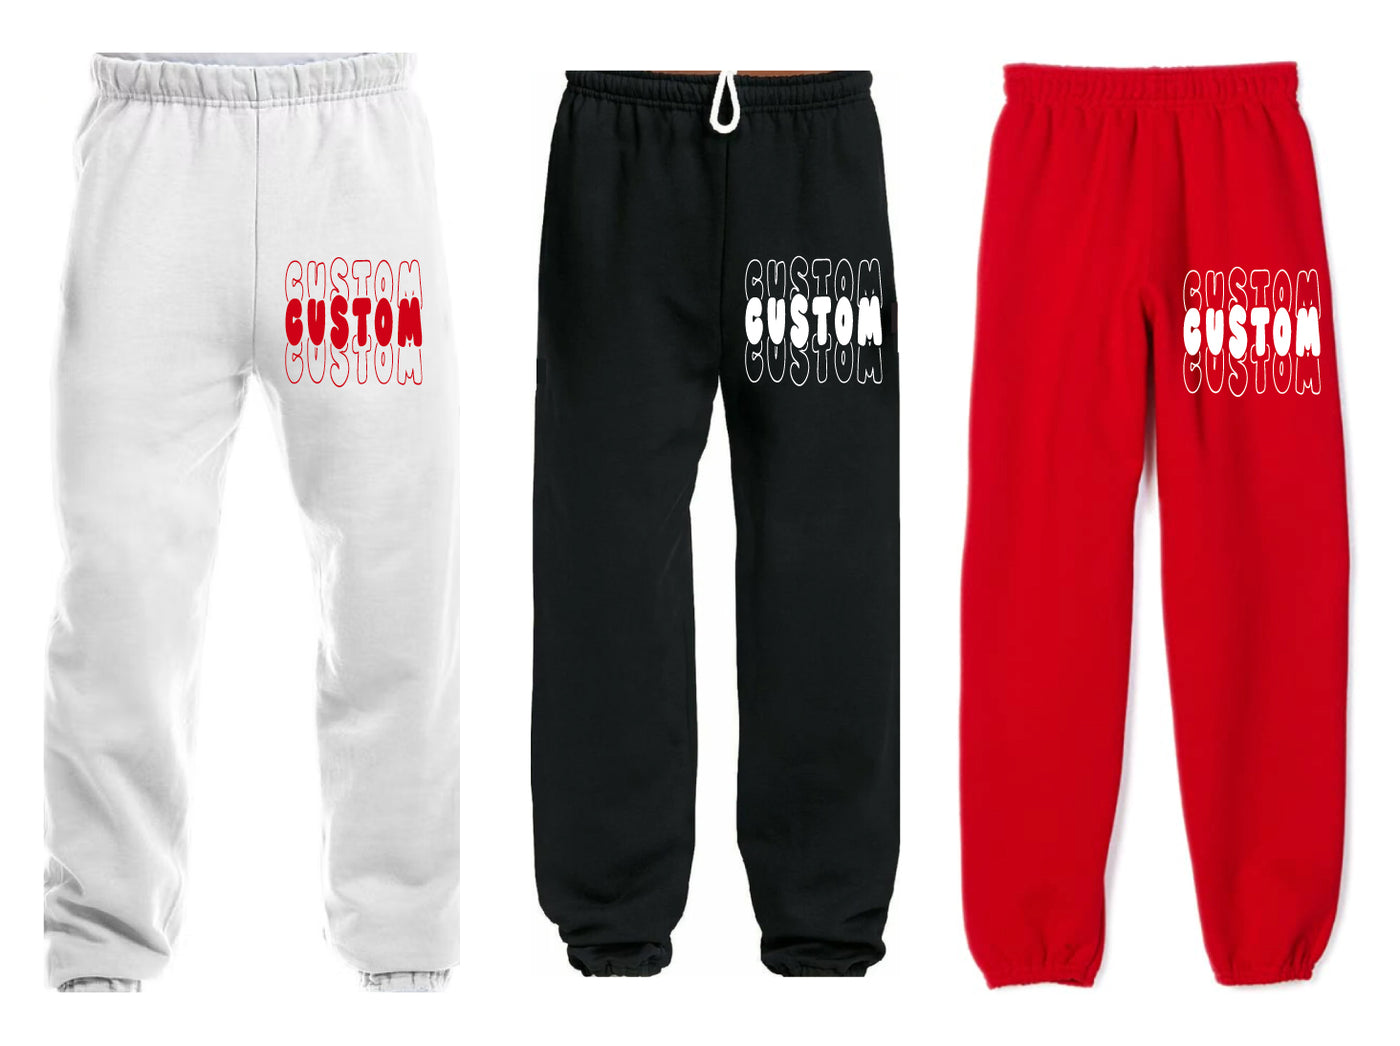 Customize Your Own Bubble Text Sweatpants